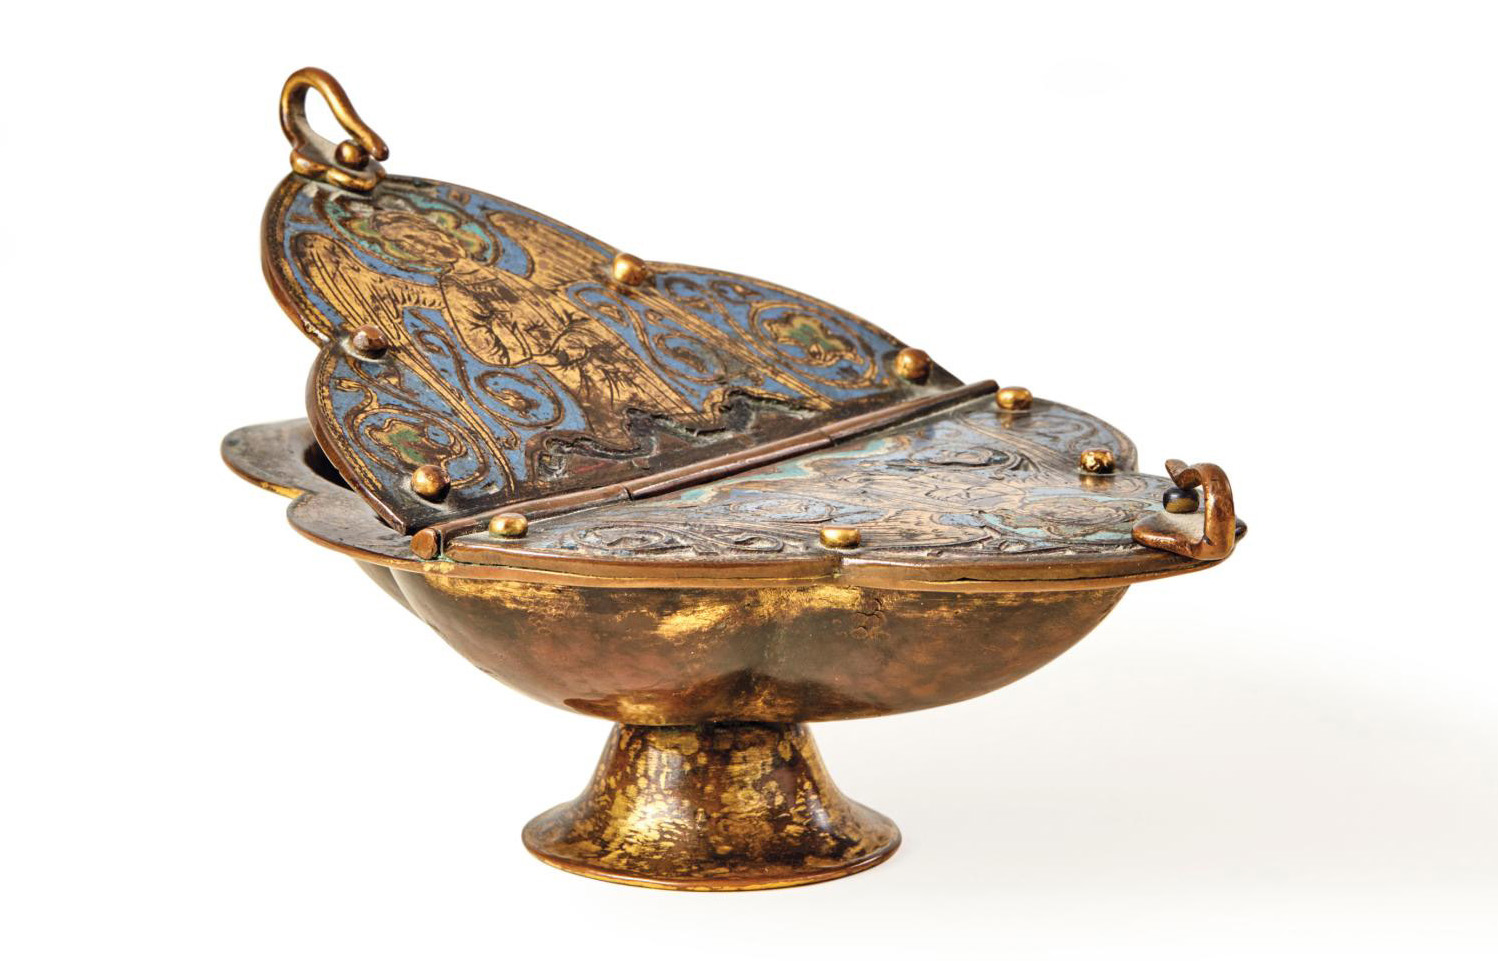 Limoges, c. 1230/1250 for the plates, third quarter of the 19th century for the base and hinges. Incense holder on a small champlevé coppe